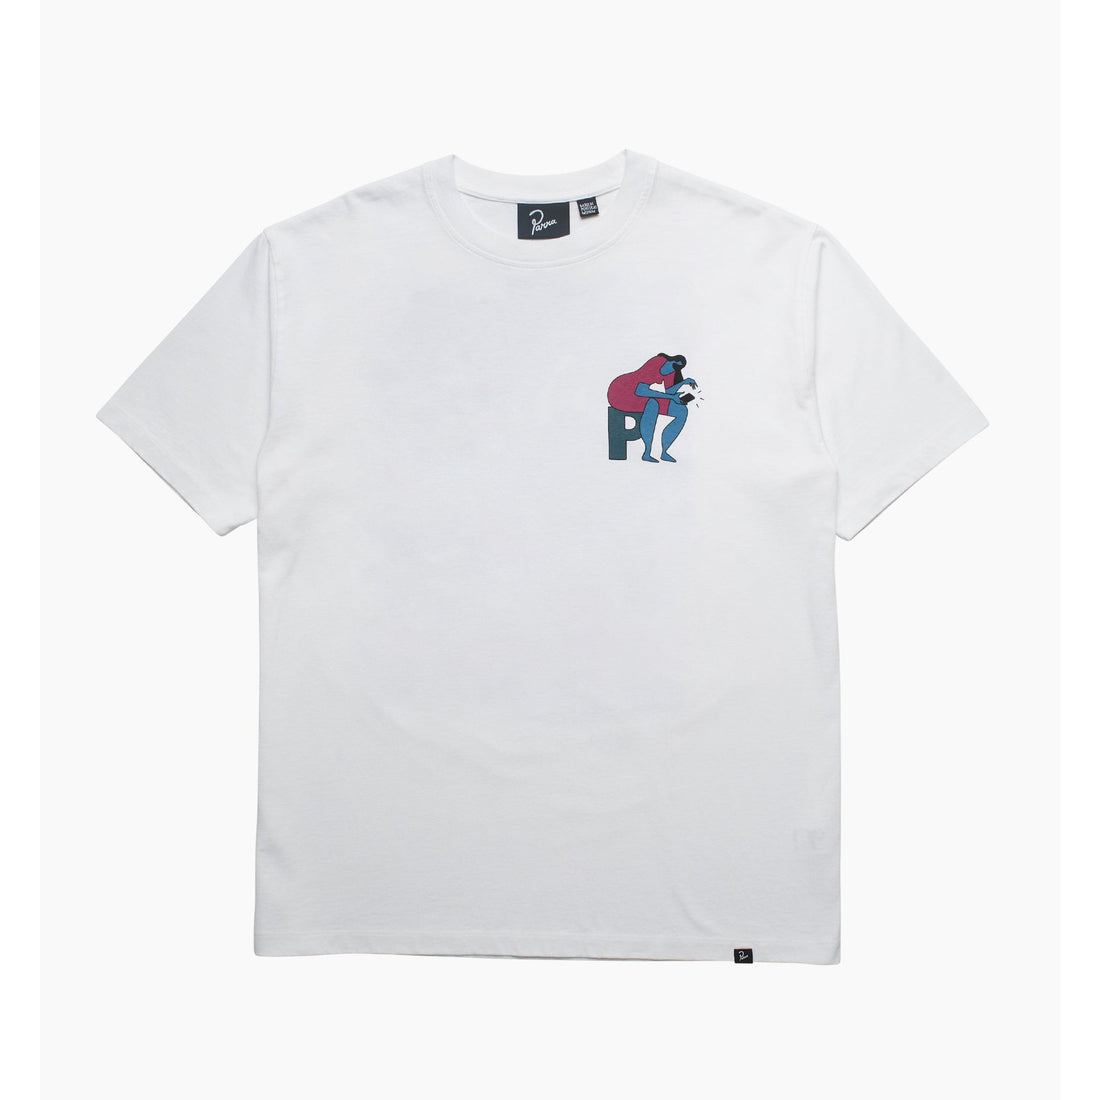 BY PARRA - INSECURE DAYS TEE - WHITE